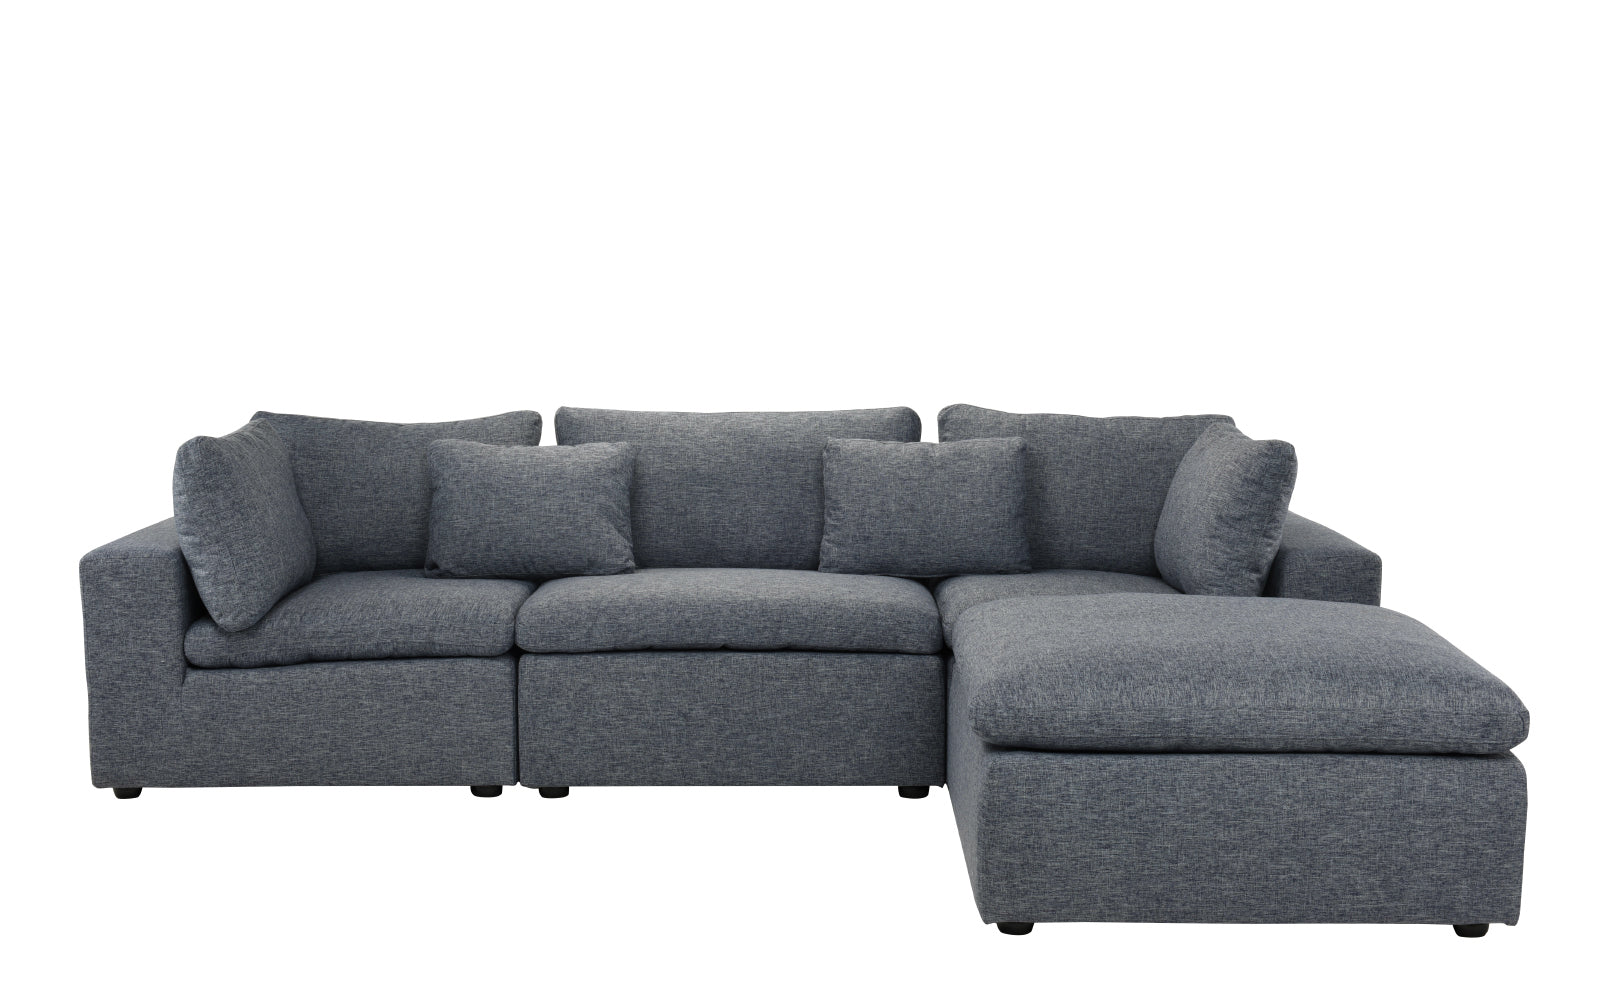 EXP296-DGR Fitz Contemporary Low Profile Lounge Sofa with Cha sku EXP296-DGR